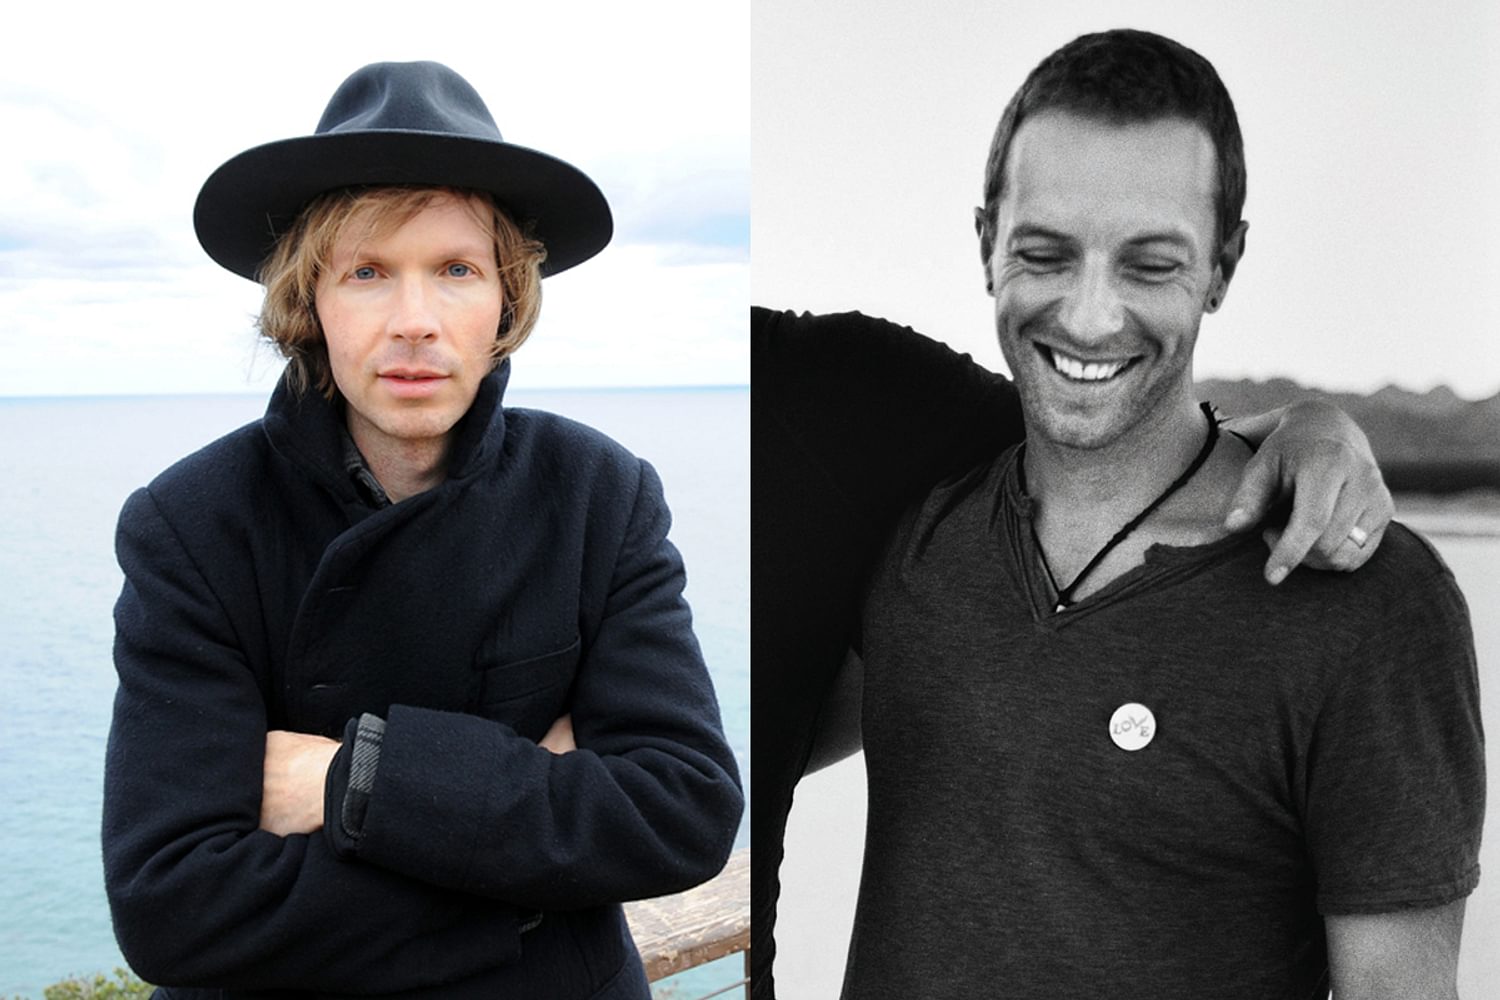 Beck and Coldplay’s Chris Martin to perform together at the Grammys